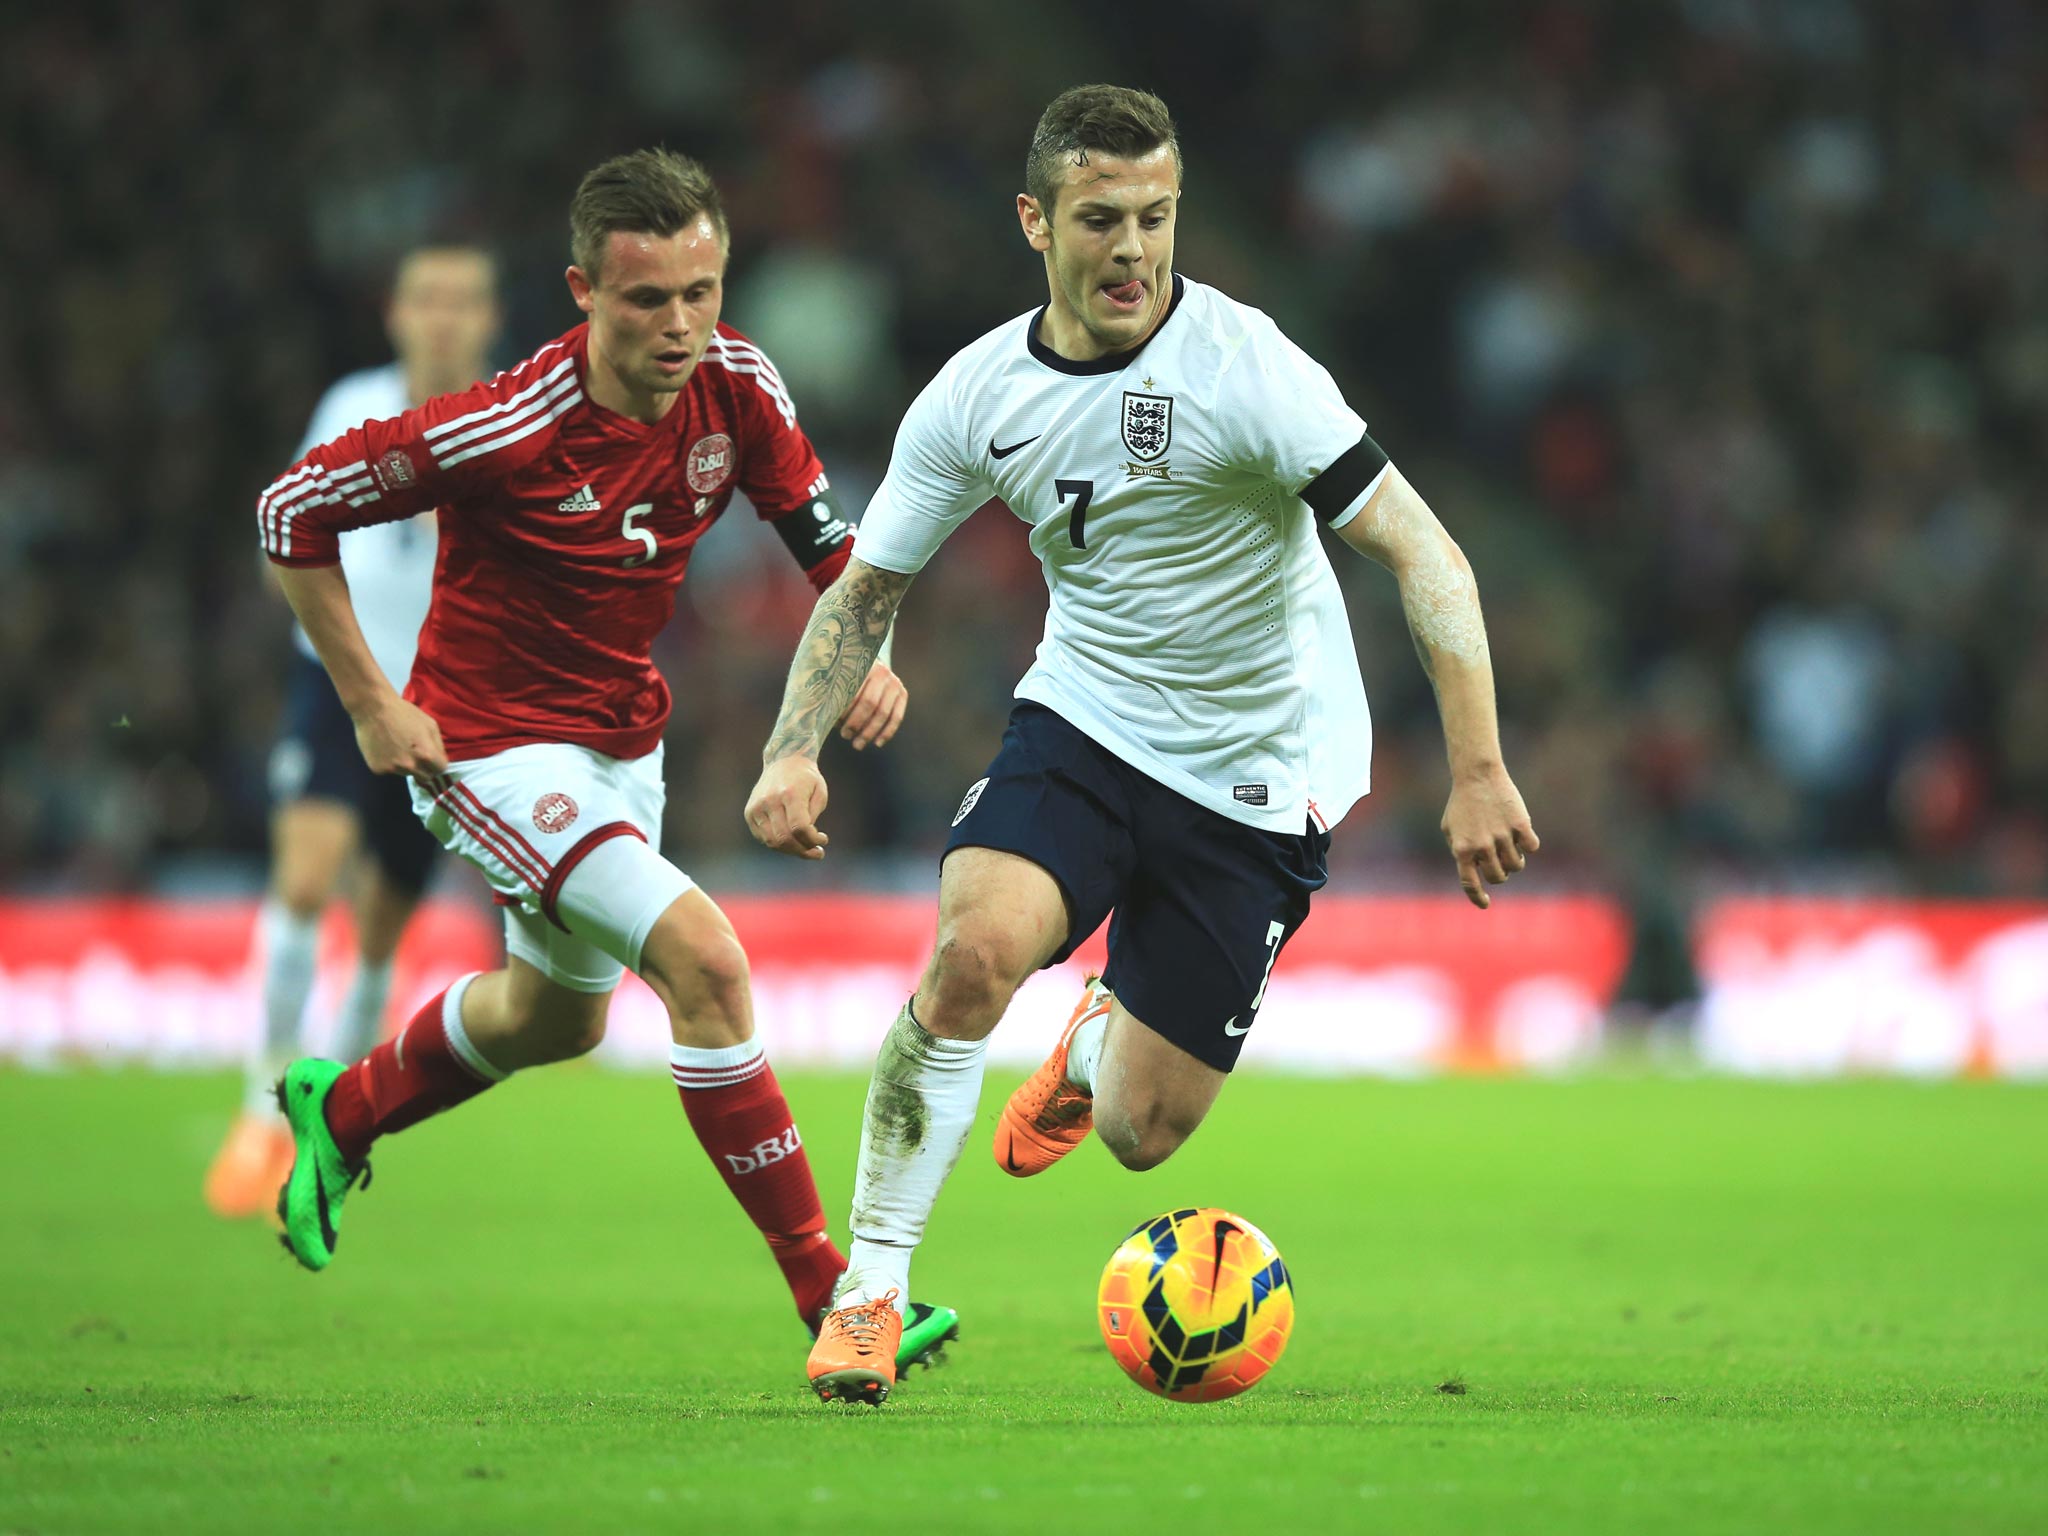 Jack Wilshere will have a maximum of five games for Arsenal in which to stake his claim for the World Cup